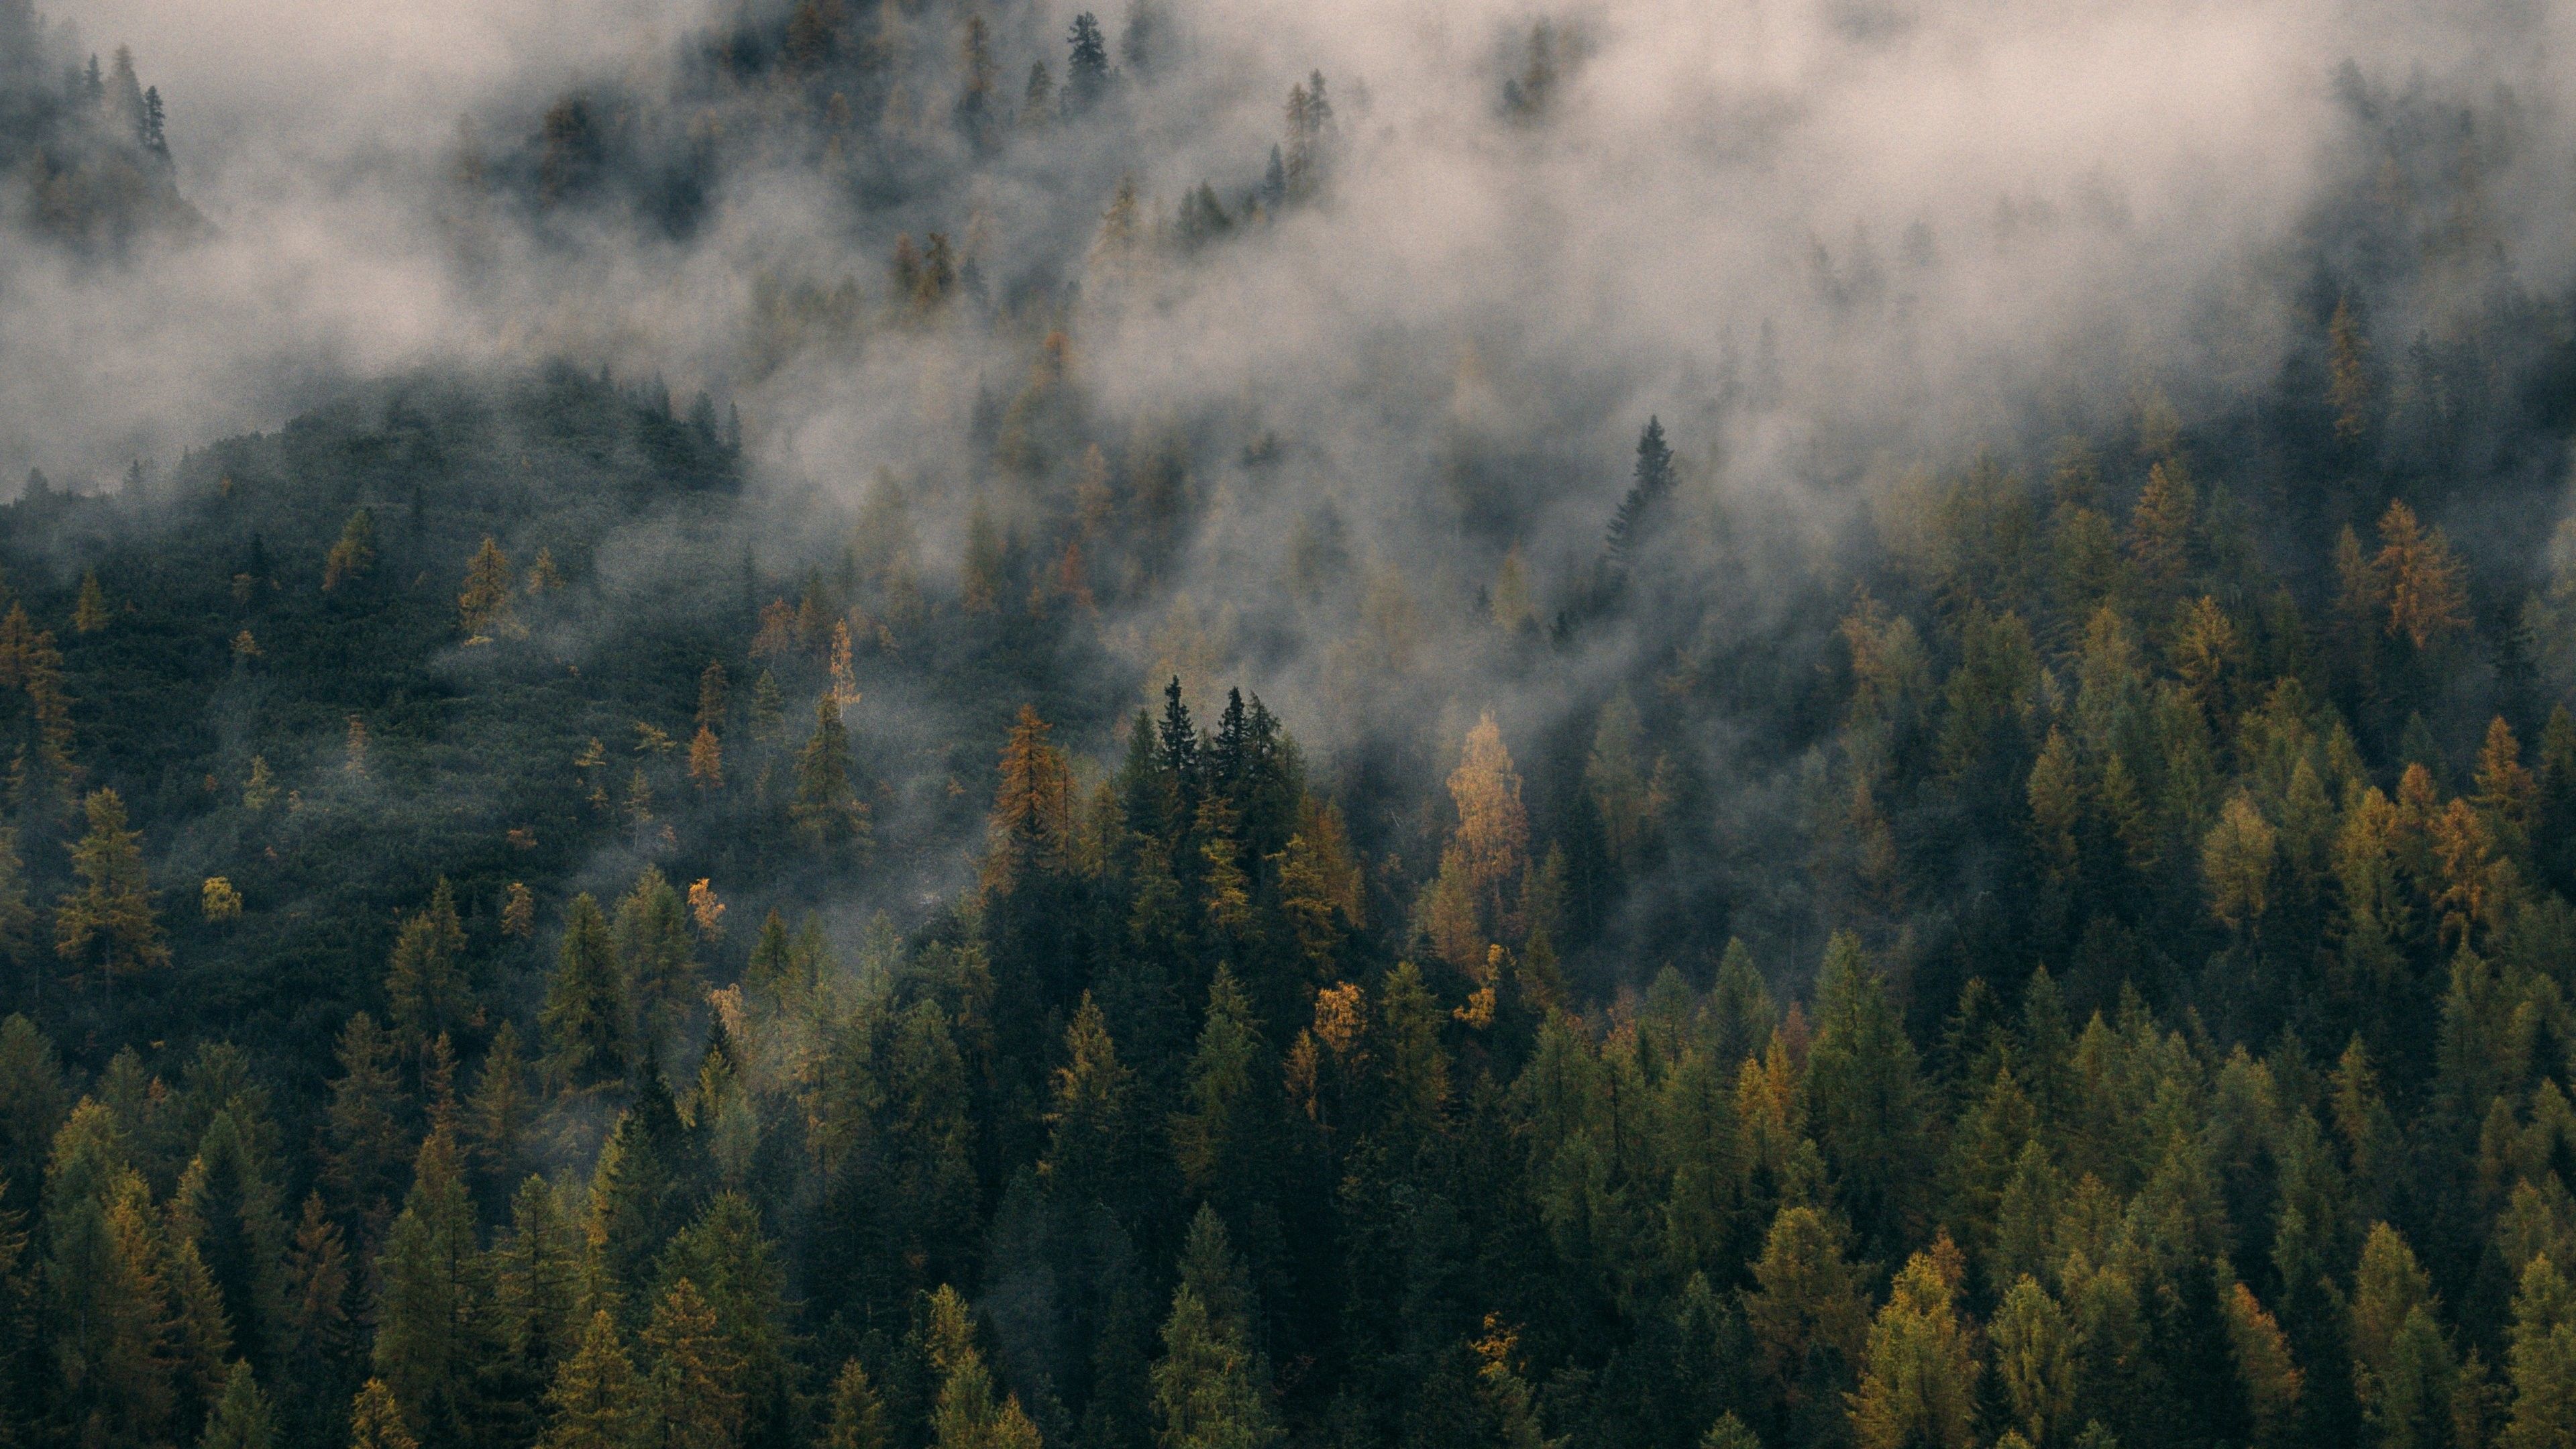 A forest of trees with low hanging clouds. - Fog, forest, foggy forest